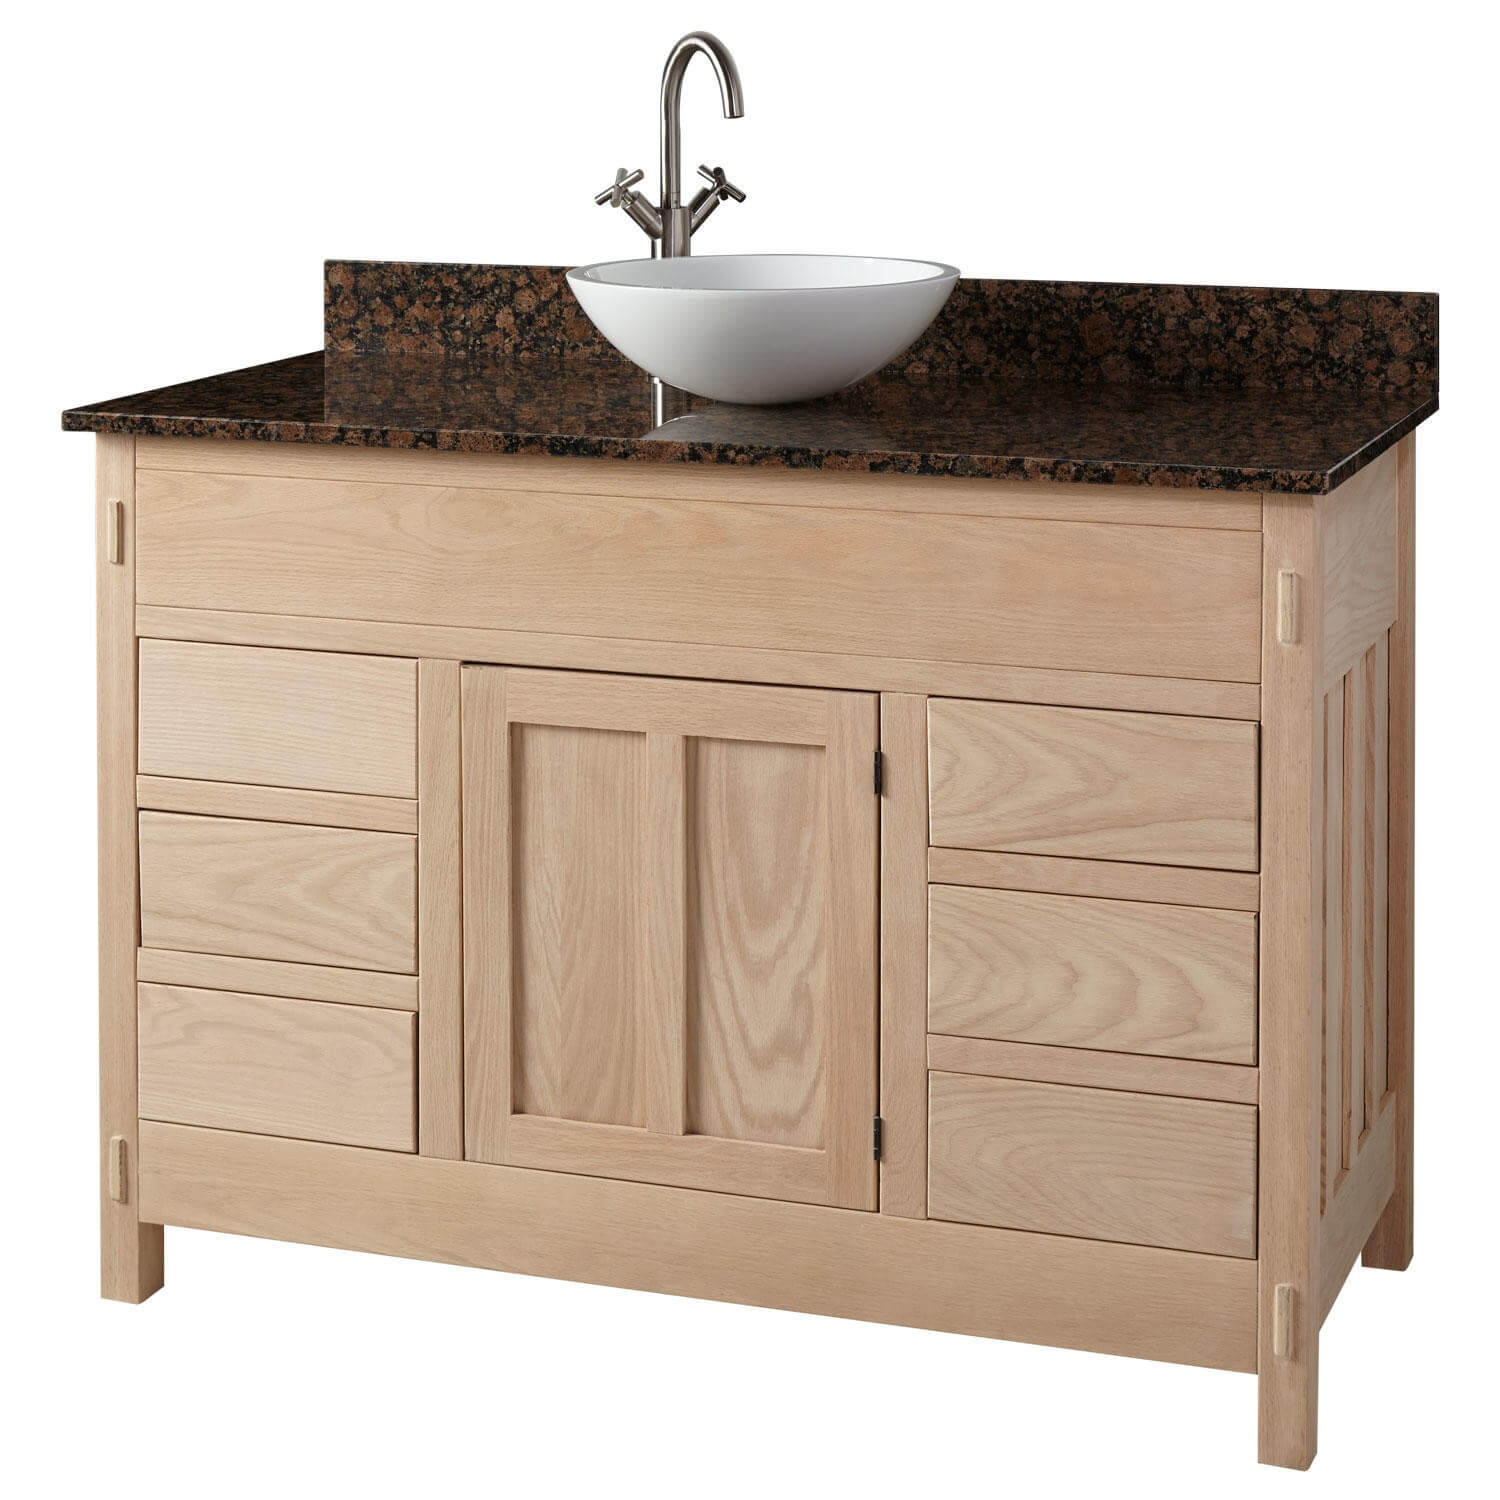 Unfinished Bathroom Vanities - 30 Inch Unfinished Bathroom Vanity Base Cabinet With Drawers